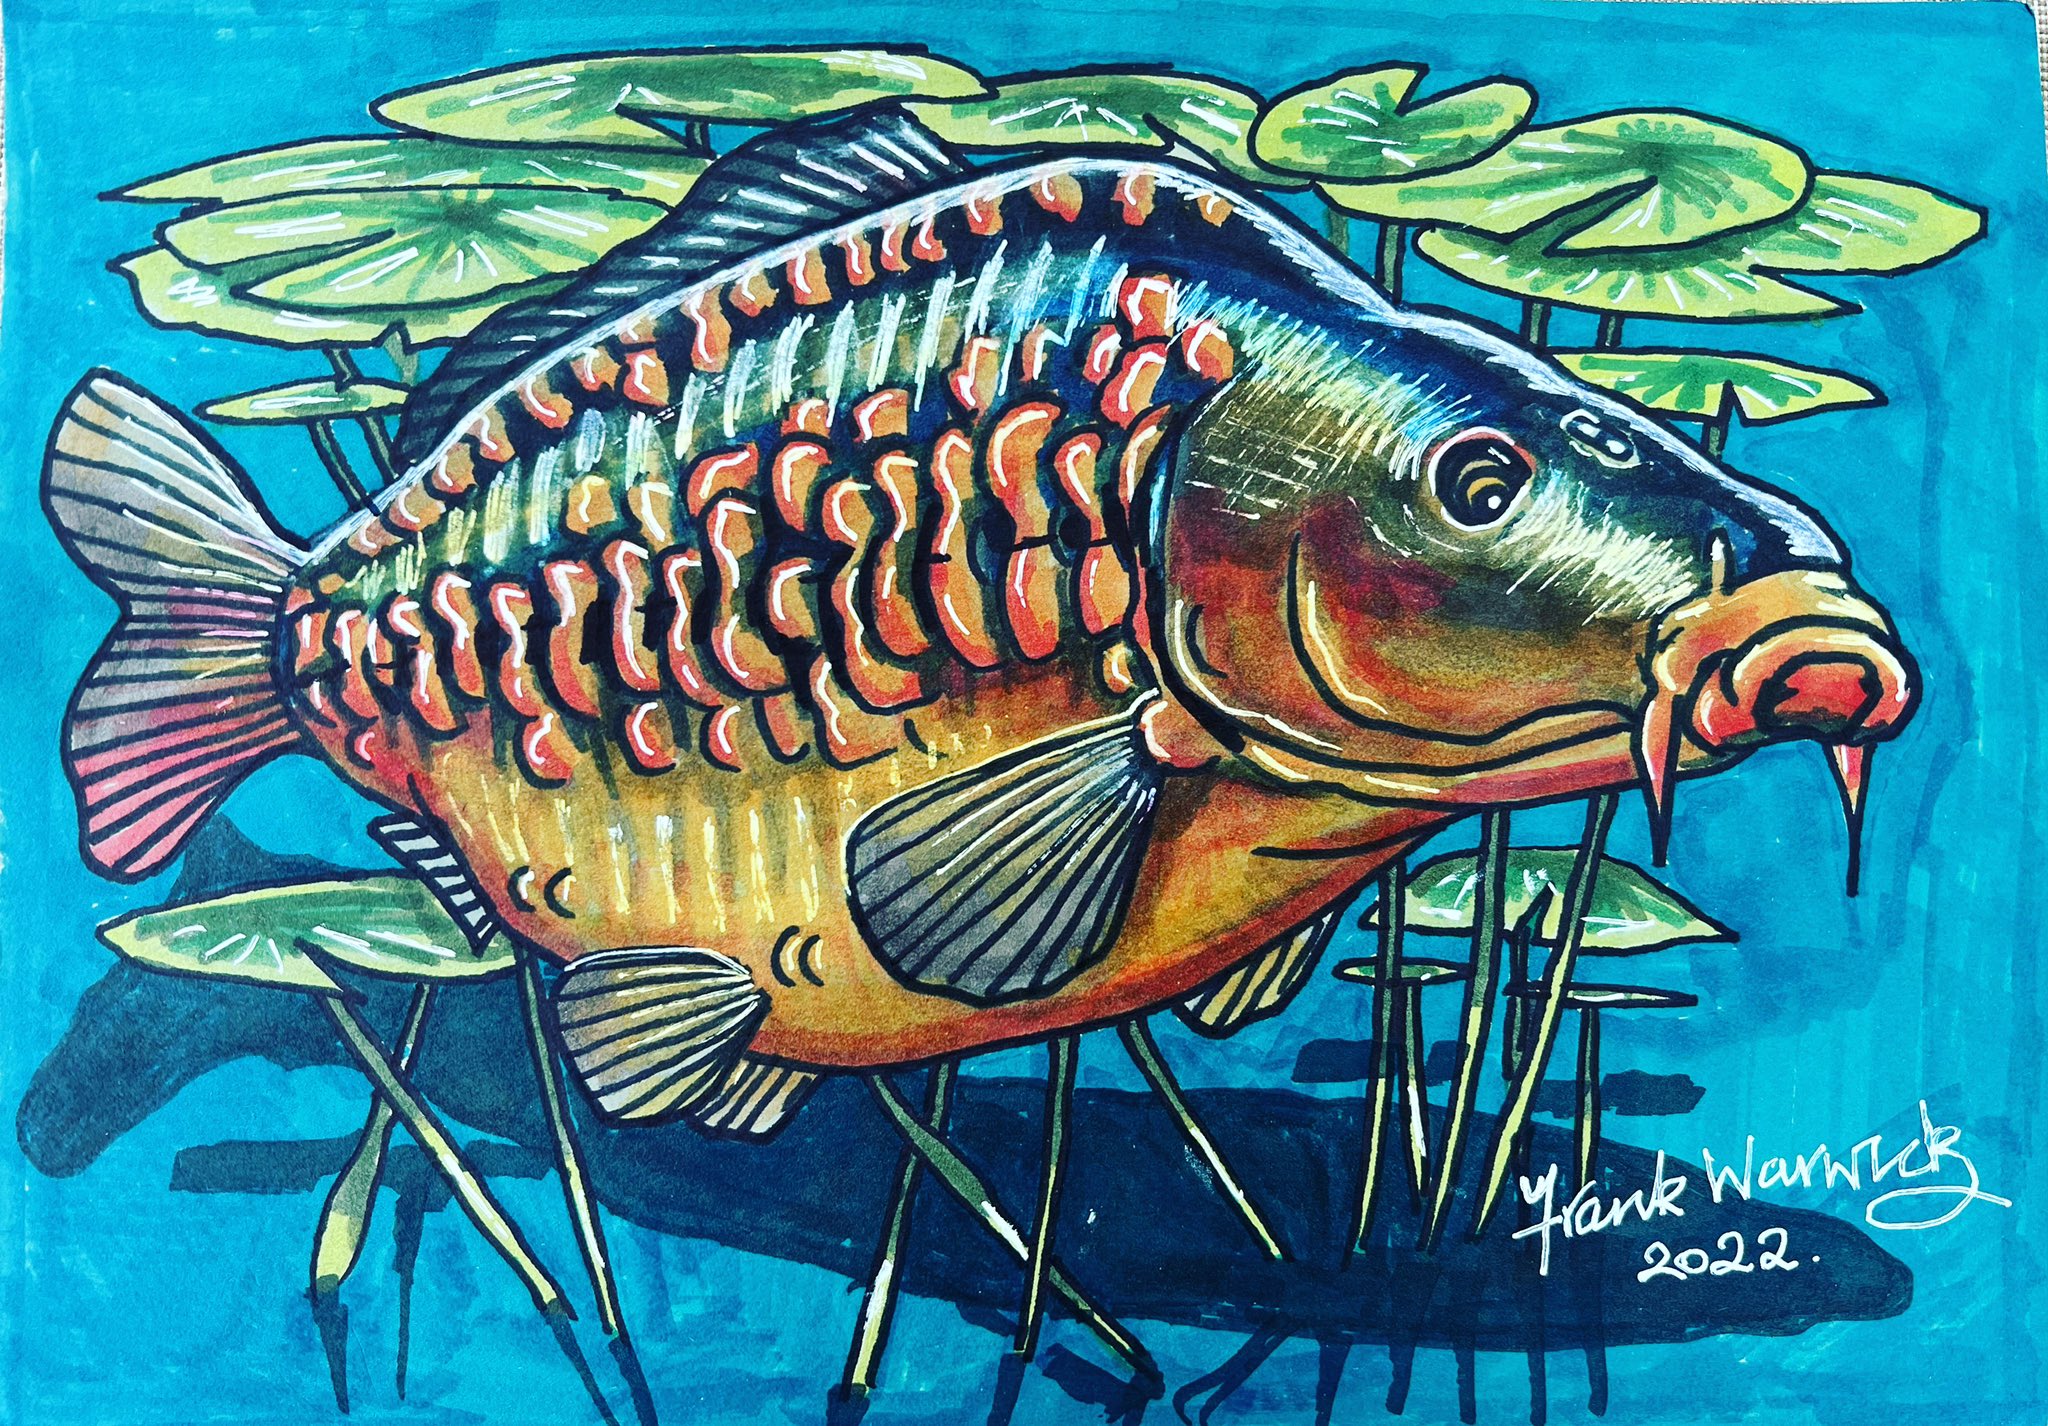 Frank Warwick on X: I absolutely love drawing carp here's one I did today  sat in the garden with felt tip pens  / X